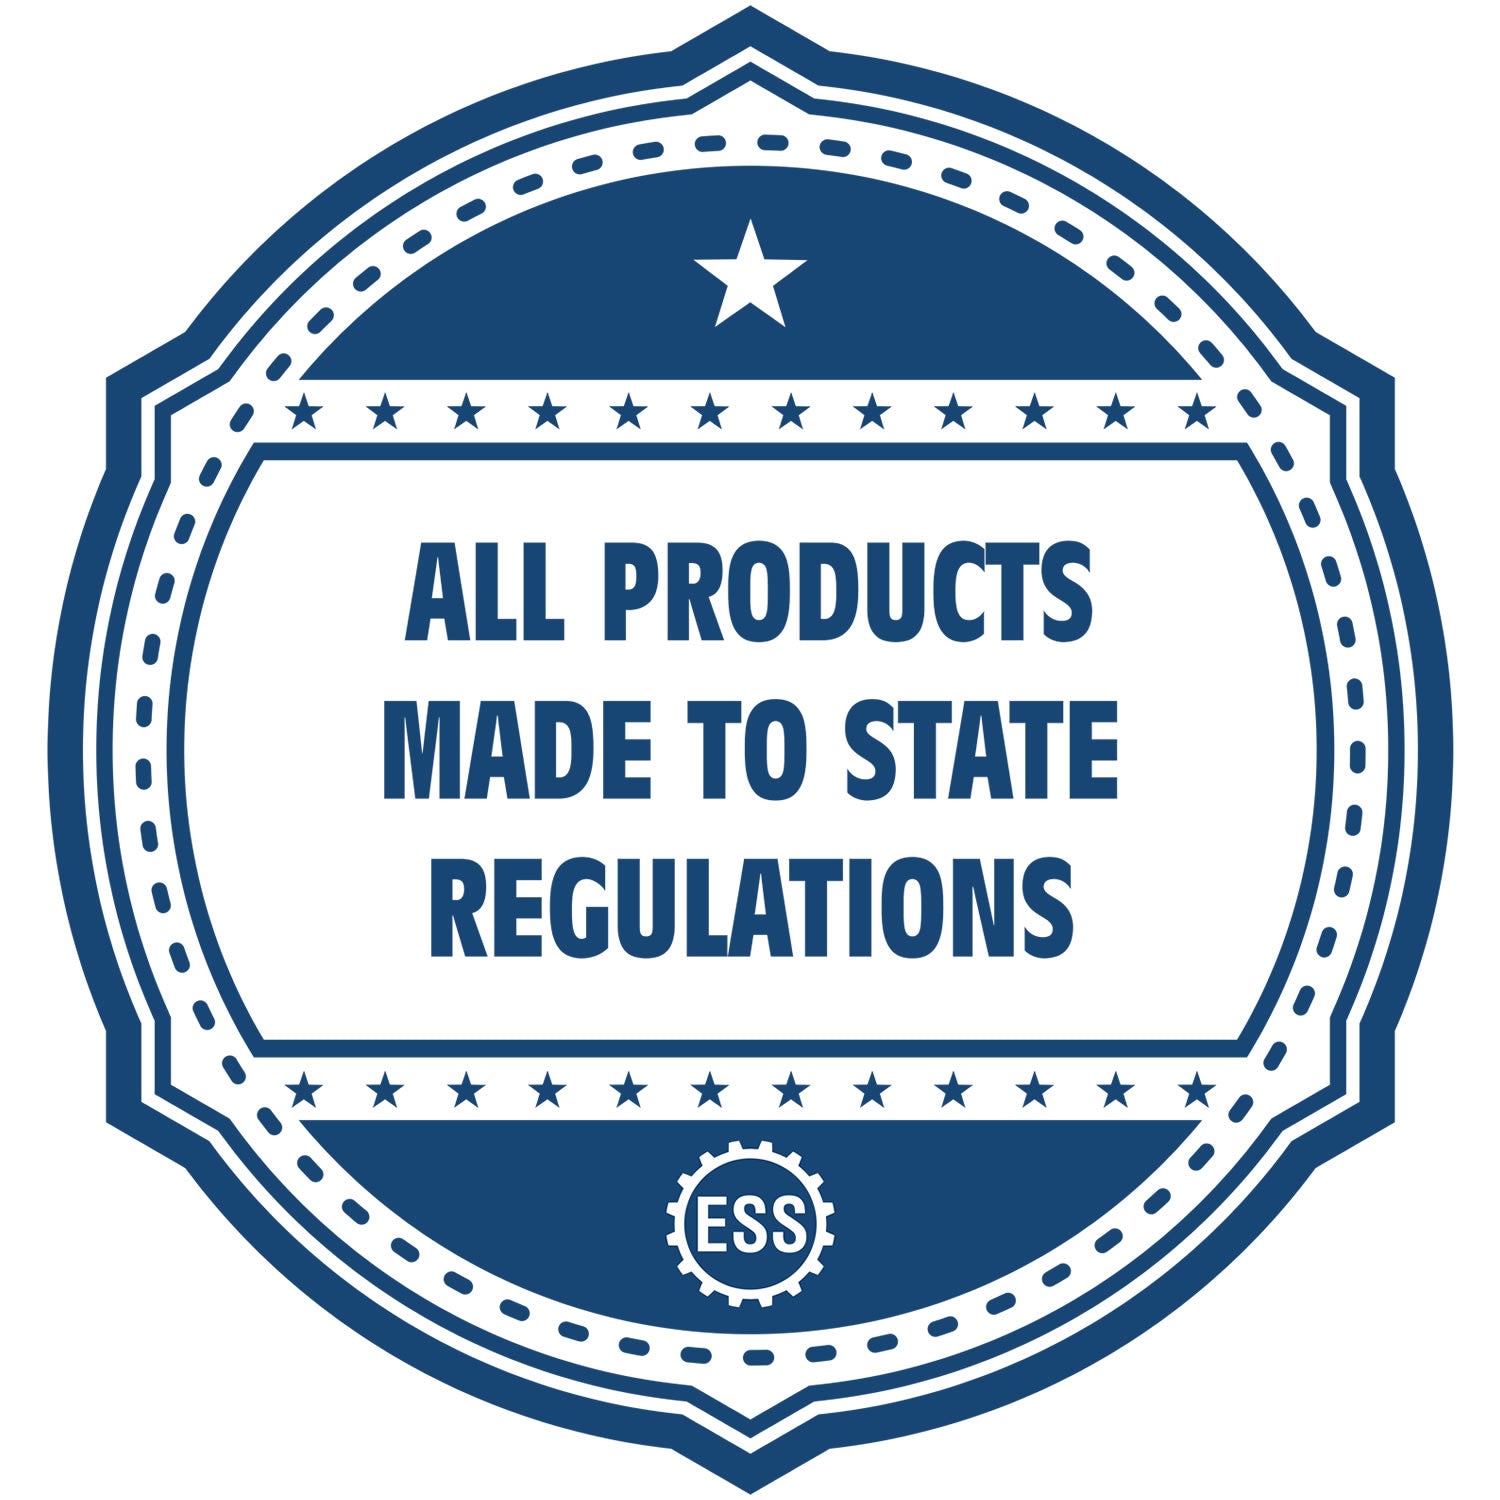 An icon or badge element for the Long Reach Colorado PE Seal showing that this product is made in compliance with state regulations.